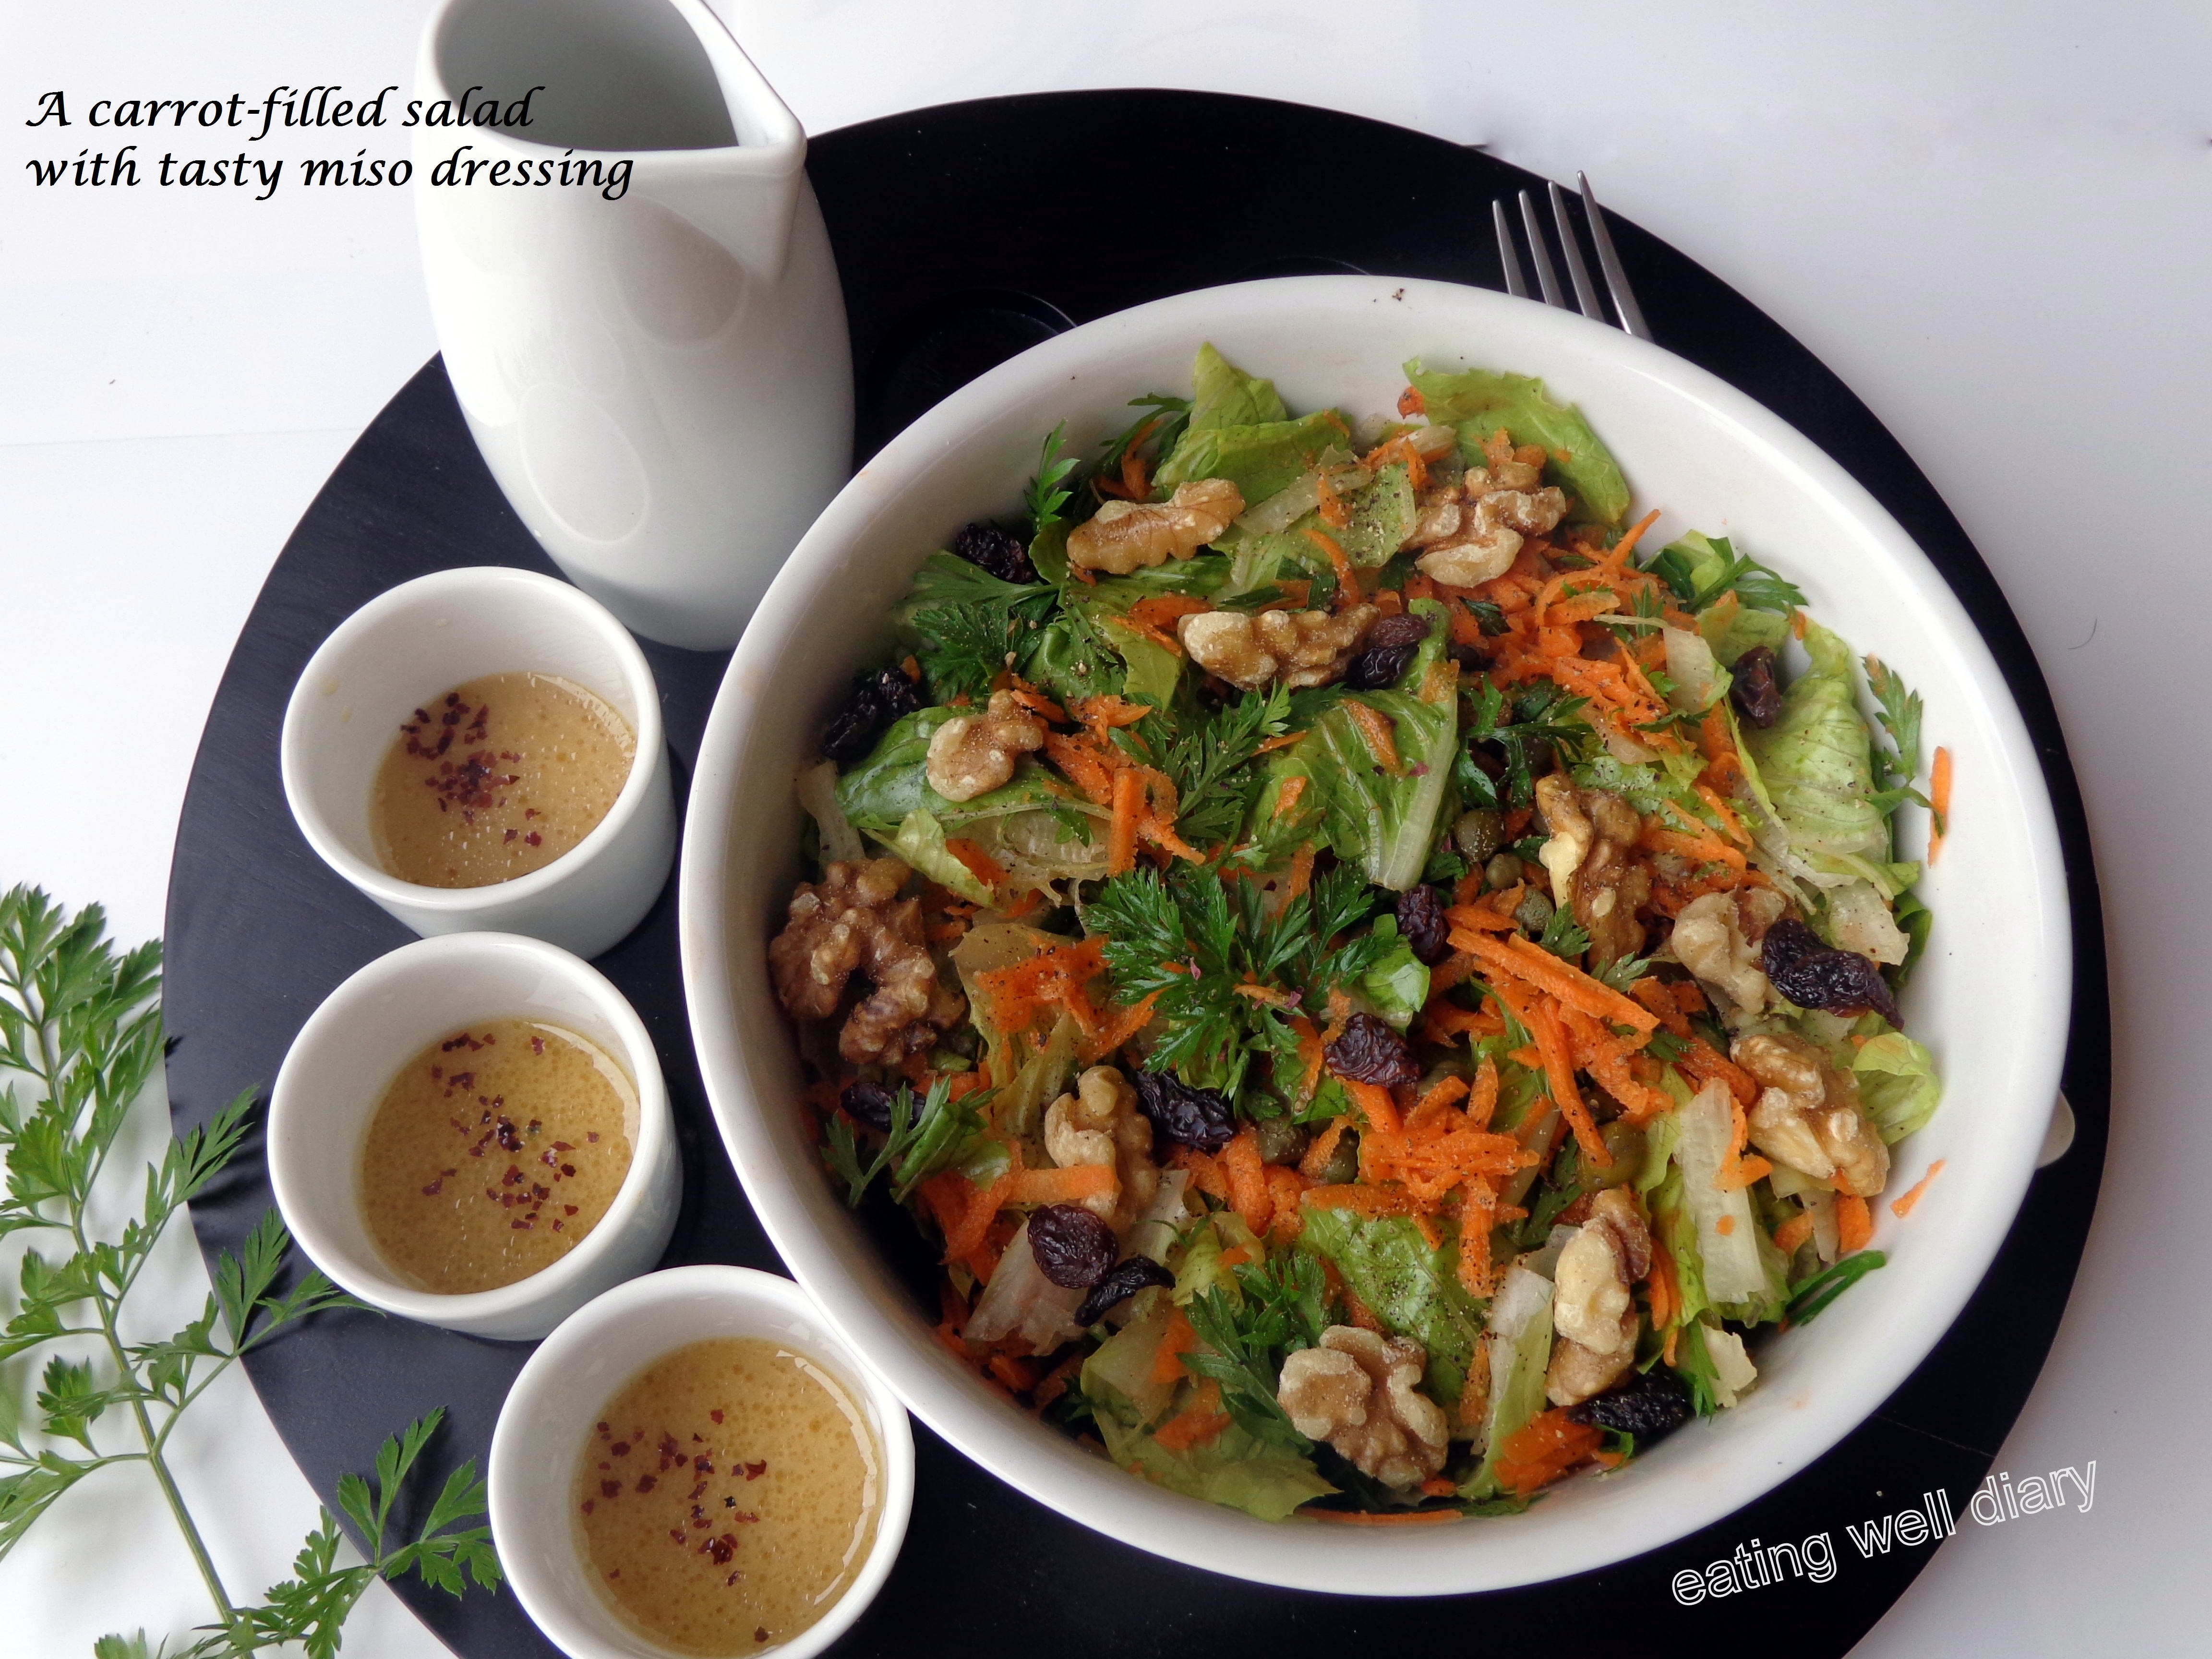 A carroty salad with tasty miso dressing